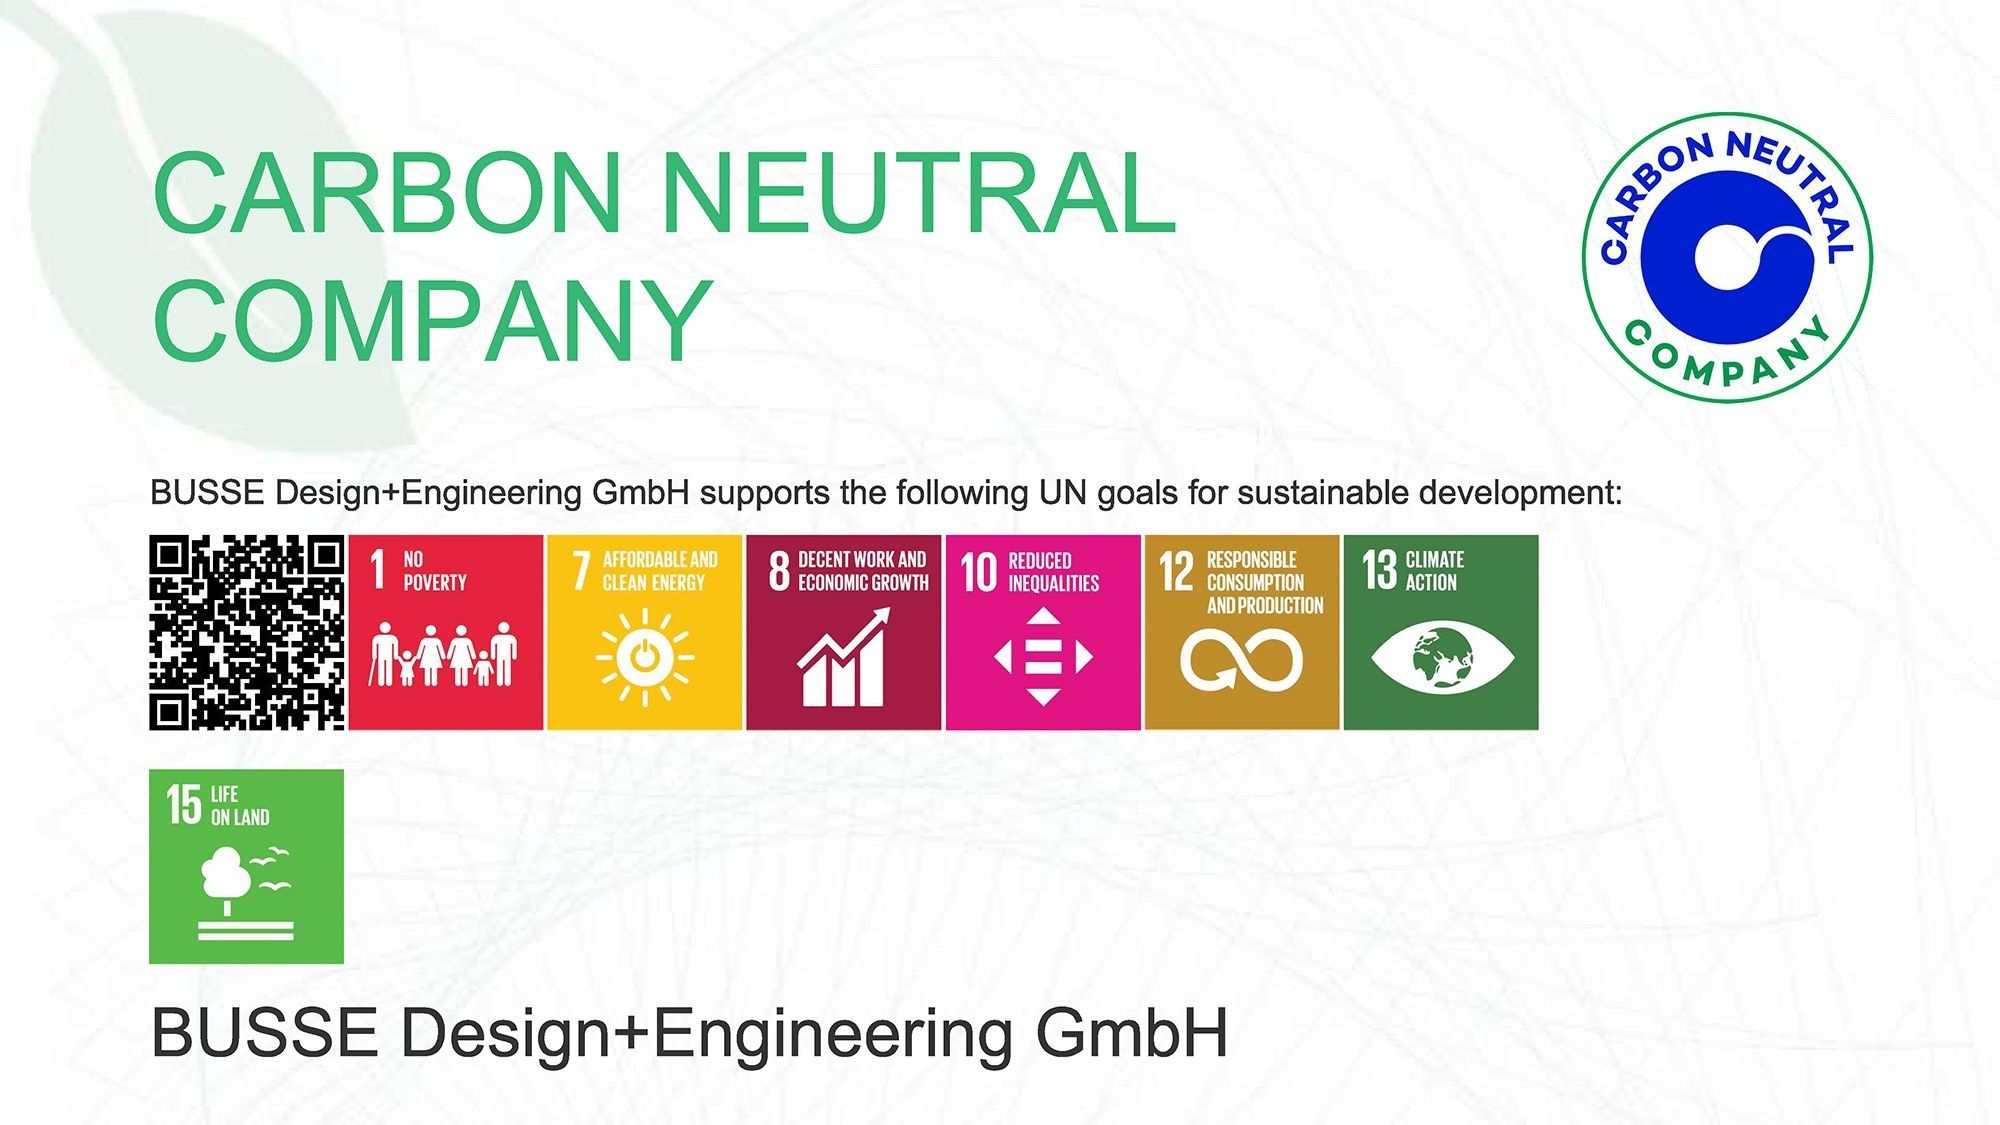 Carbon neutral Company CCertificate for Busse design and engineering